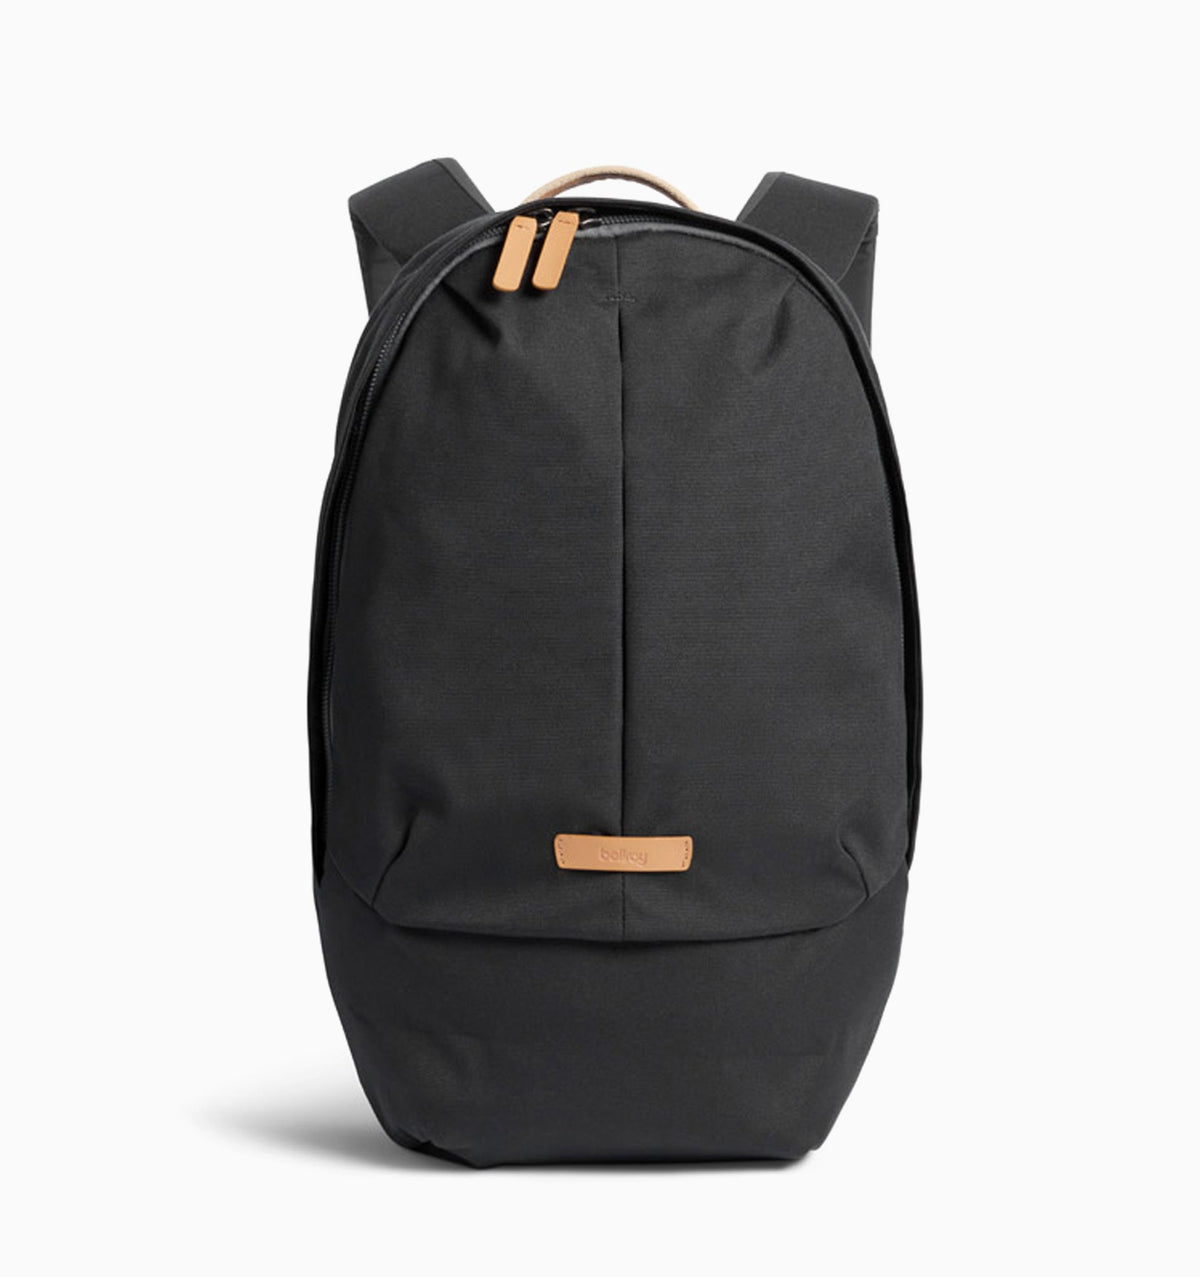 Bellroy Classic Laptop Backpack Plus (Second Edition) - Charcoal